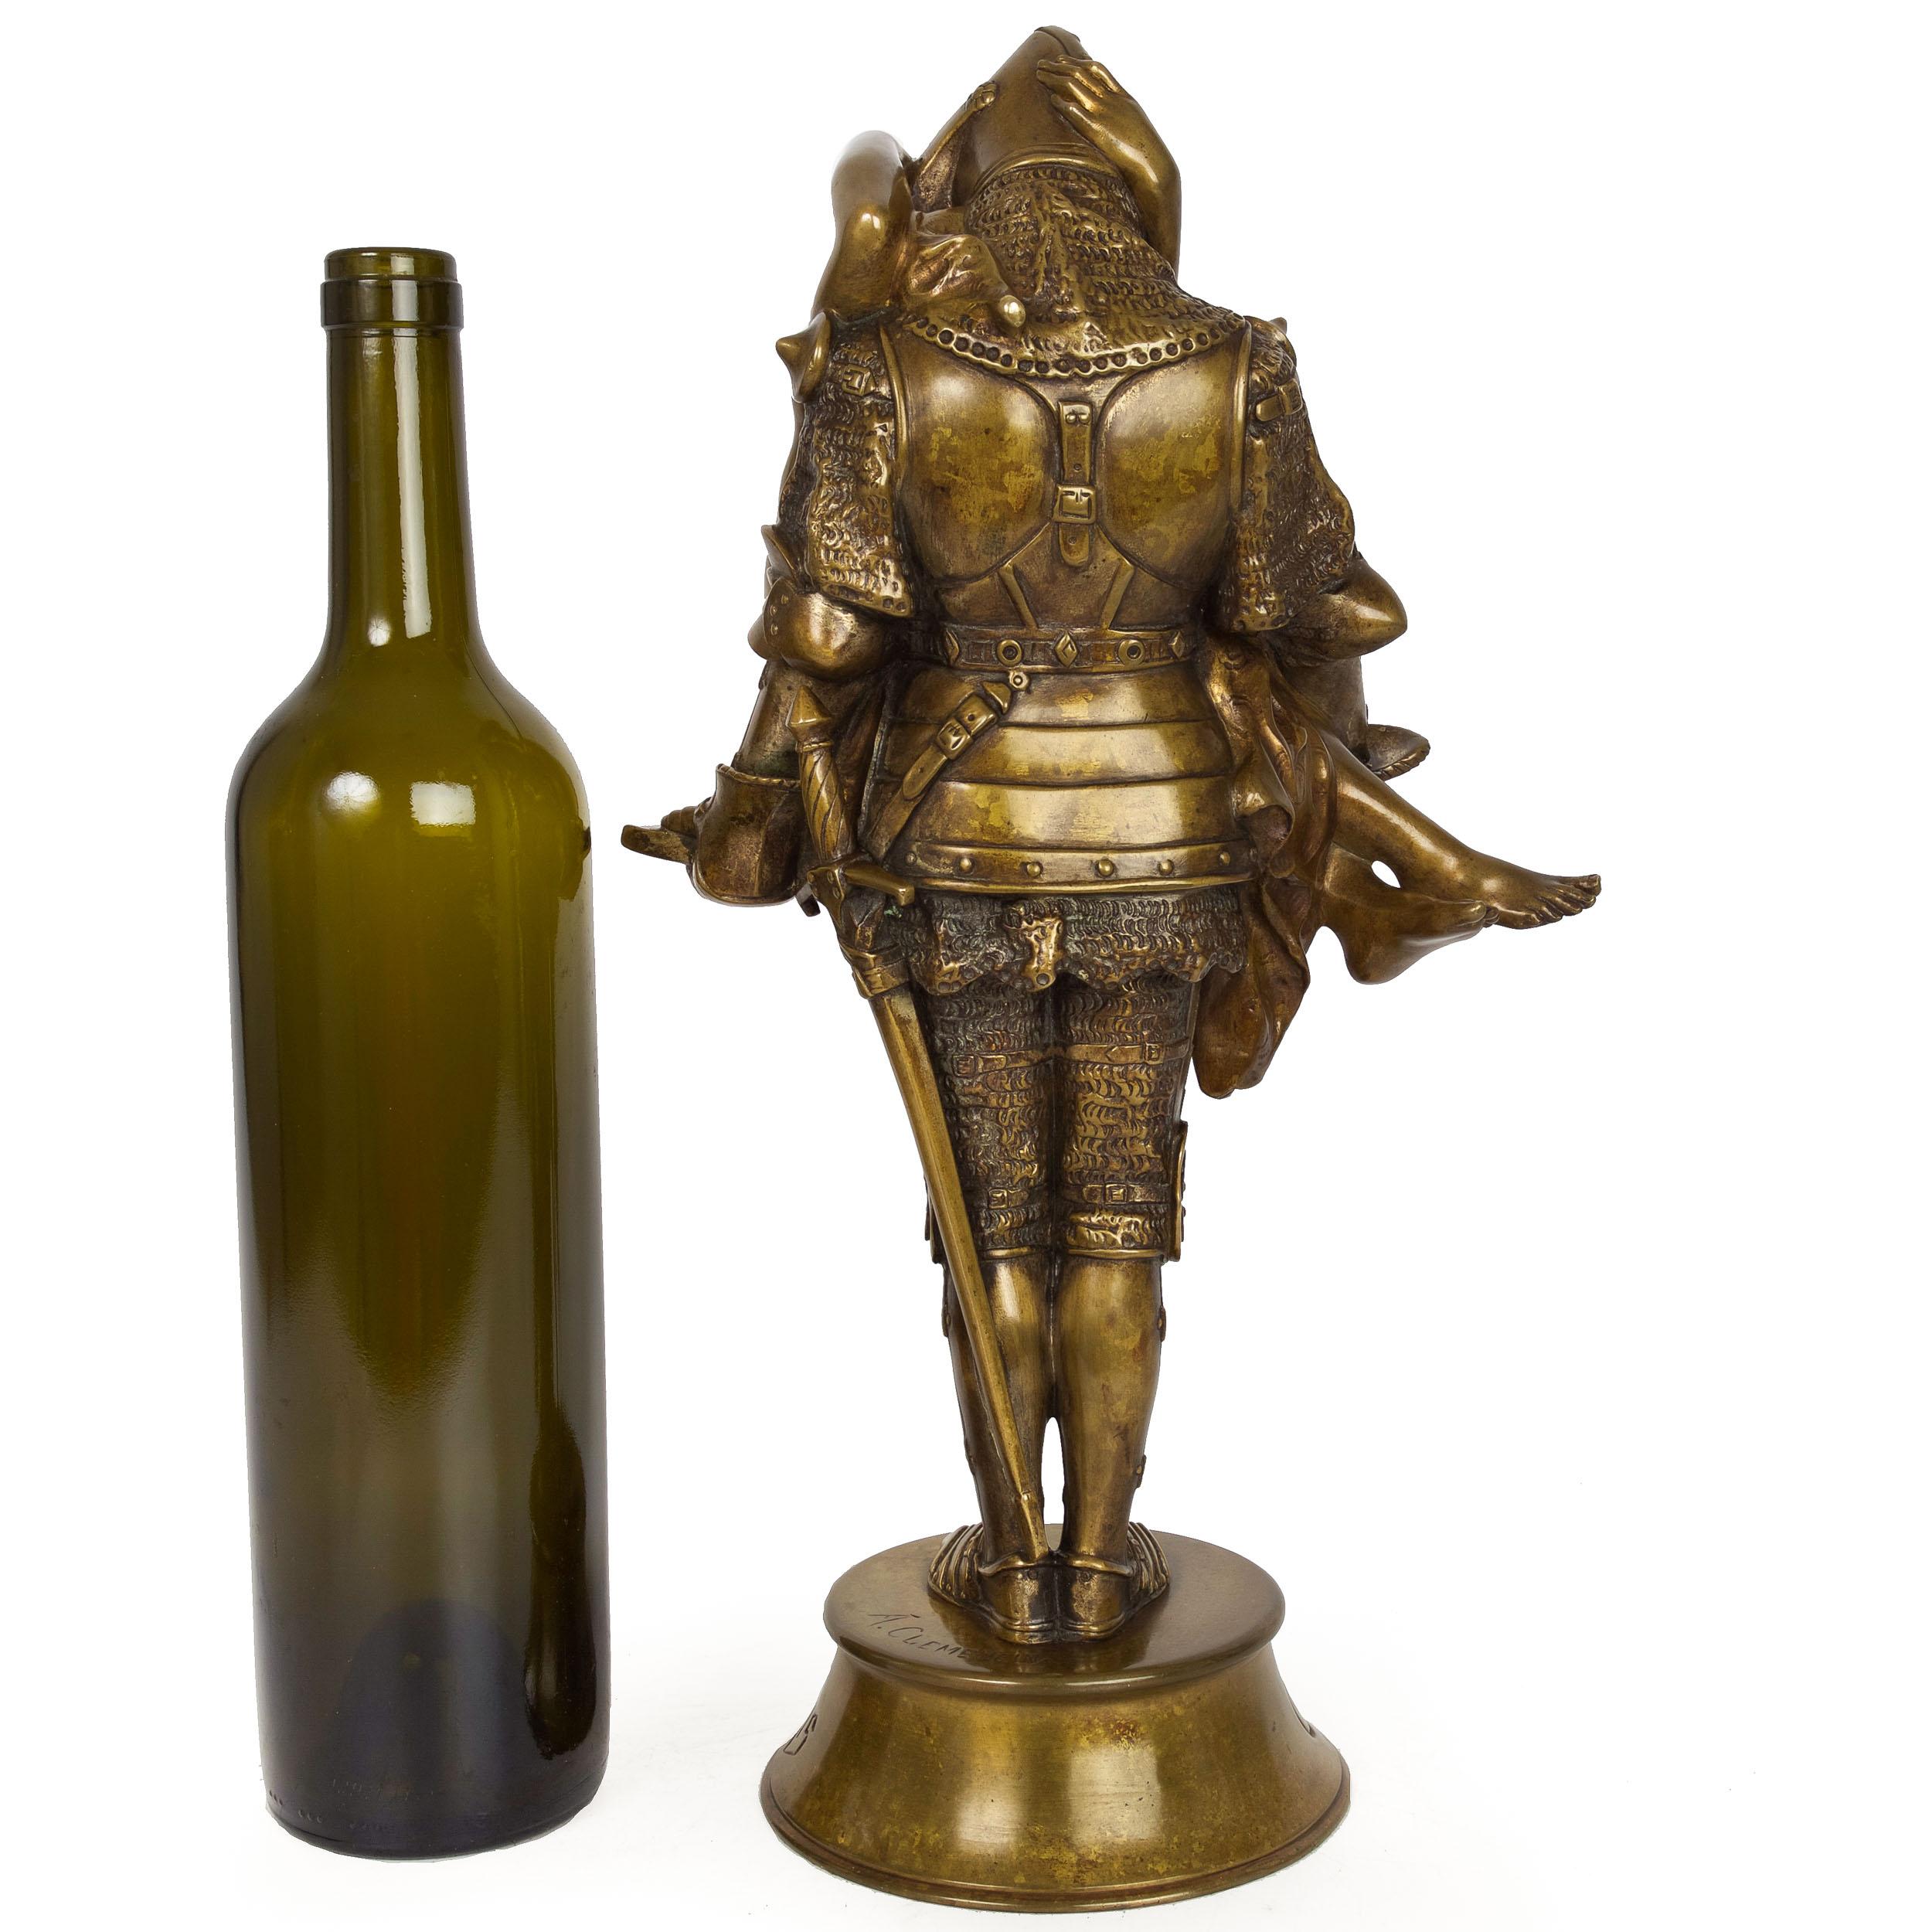 French Antique Art Nouveau Bronze Sculpture of Knight by François A. Clémencin In Good Condition For Sale In Shippensburg, PA